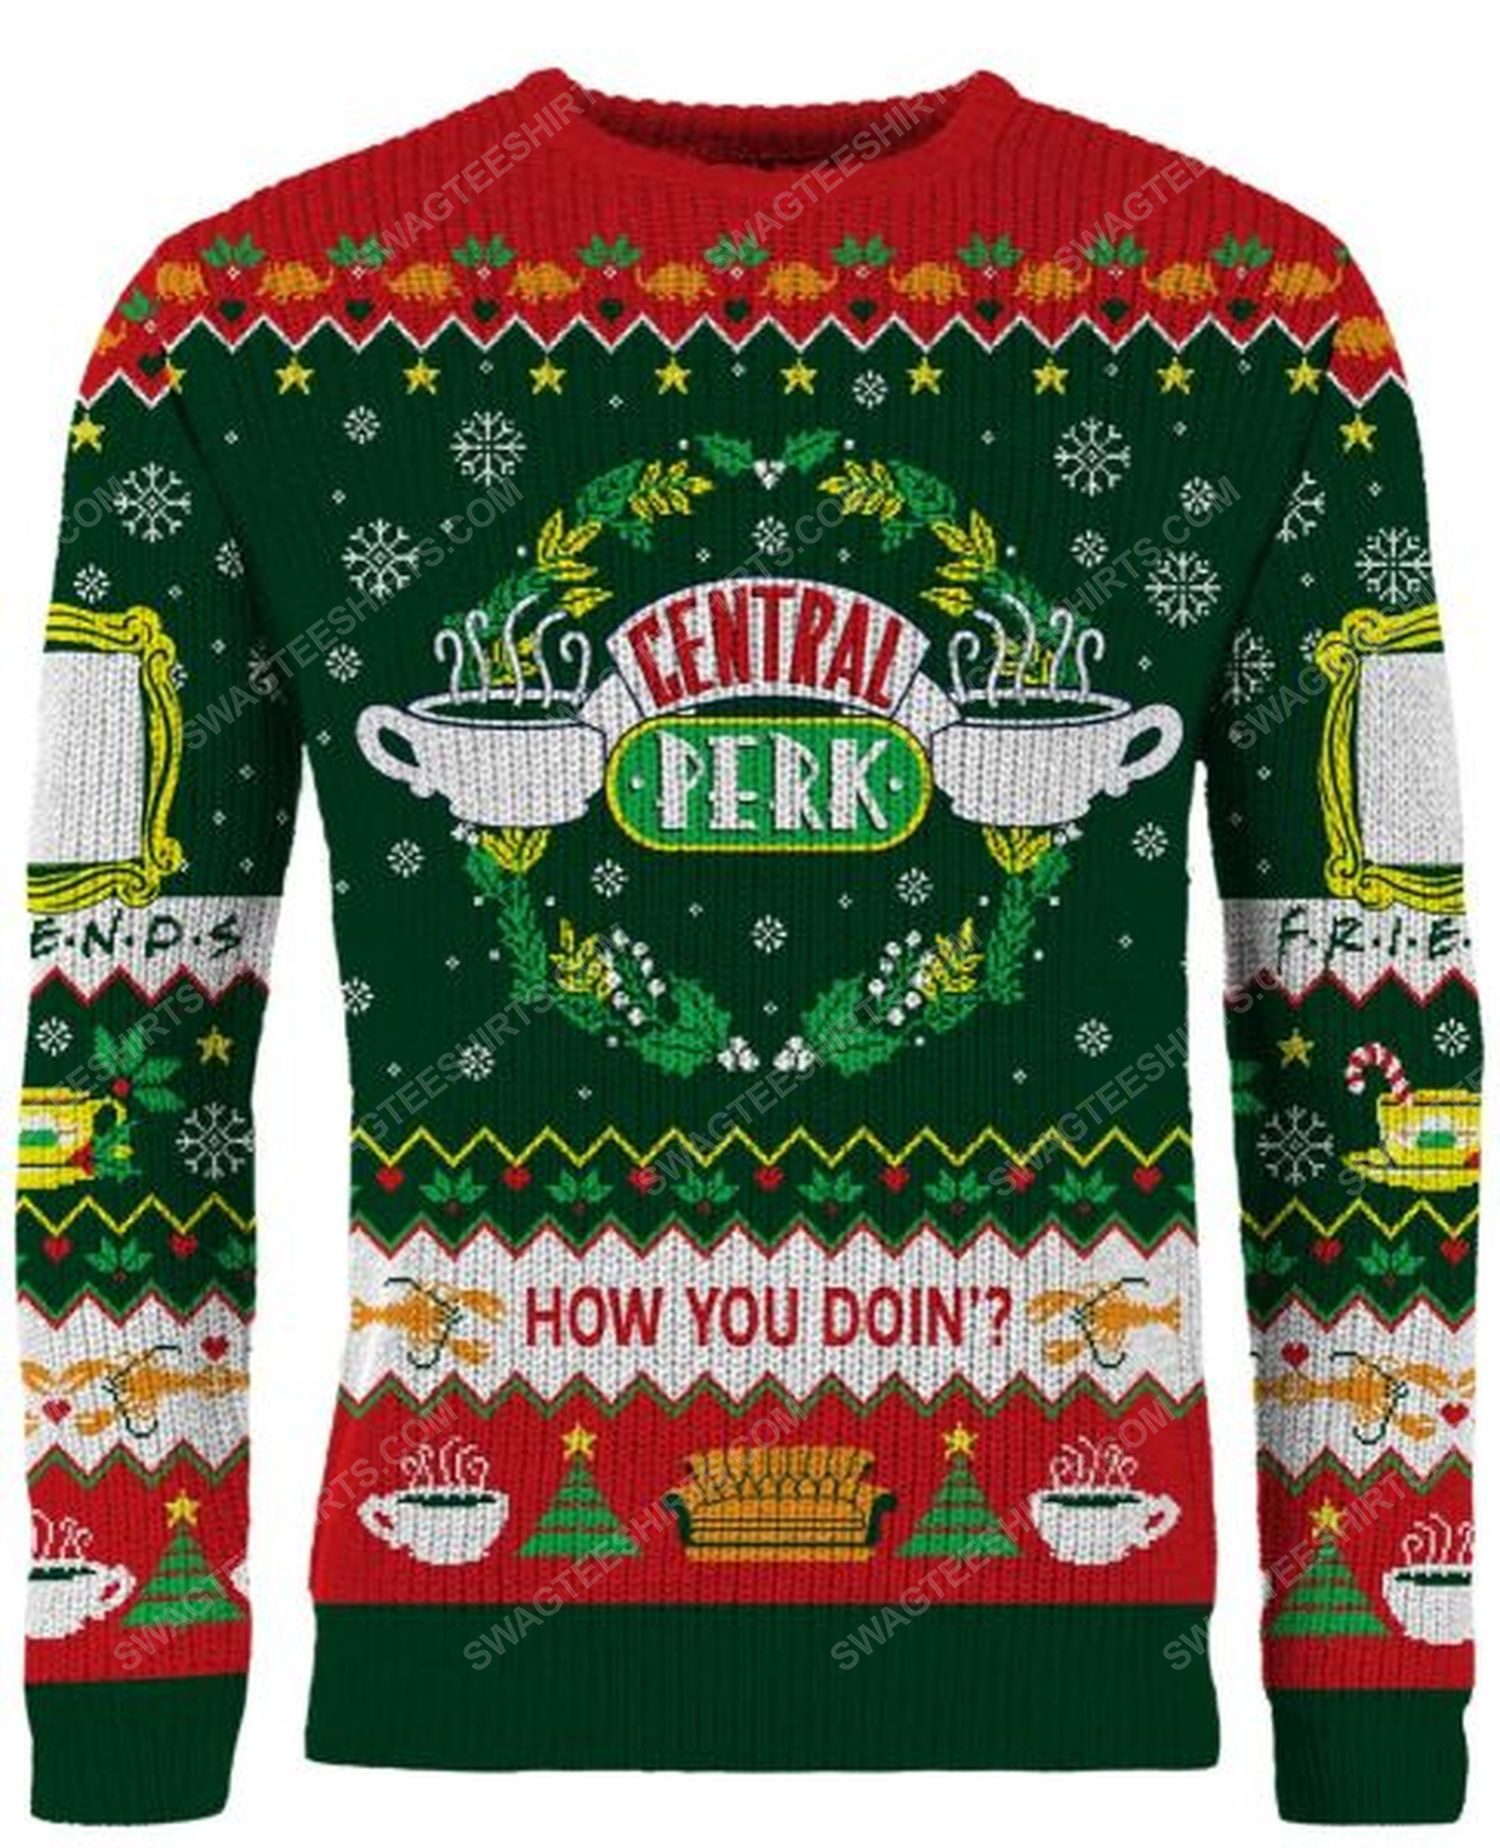 Central perk holiday how you doin full print ugly christmas sweater 1